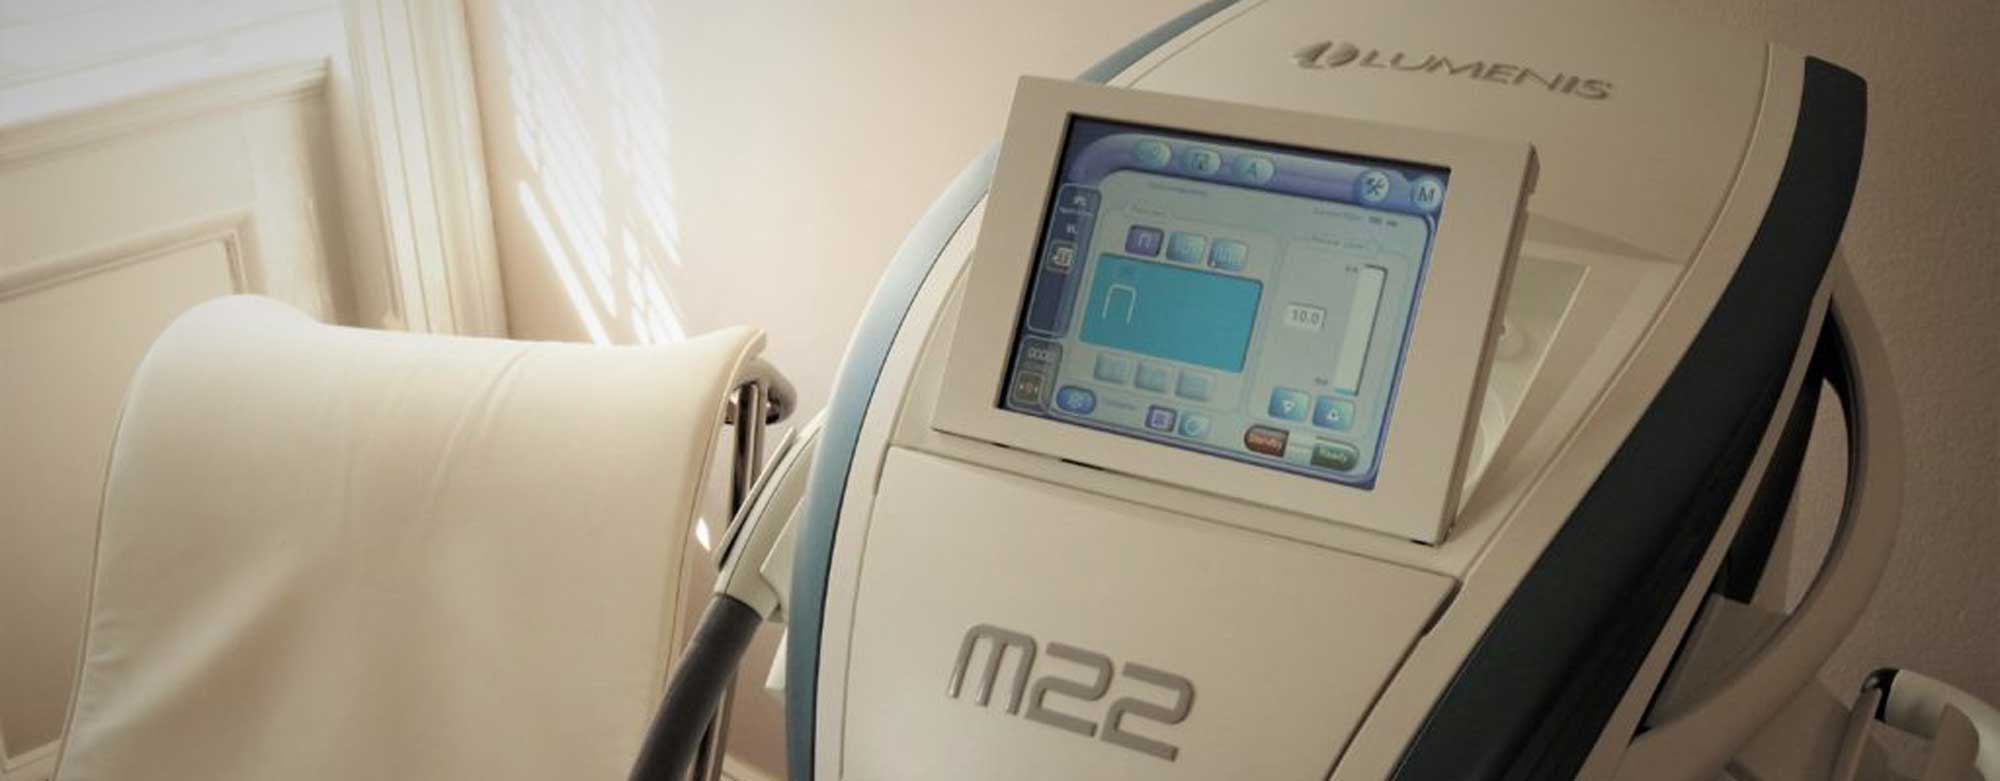 M22™ combines Intense Pulsed Light (IPL) with unique Optimal Pulse Technology (OPT™)